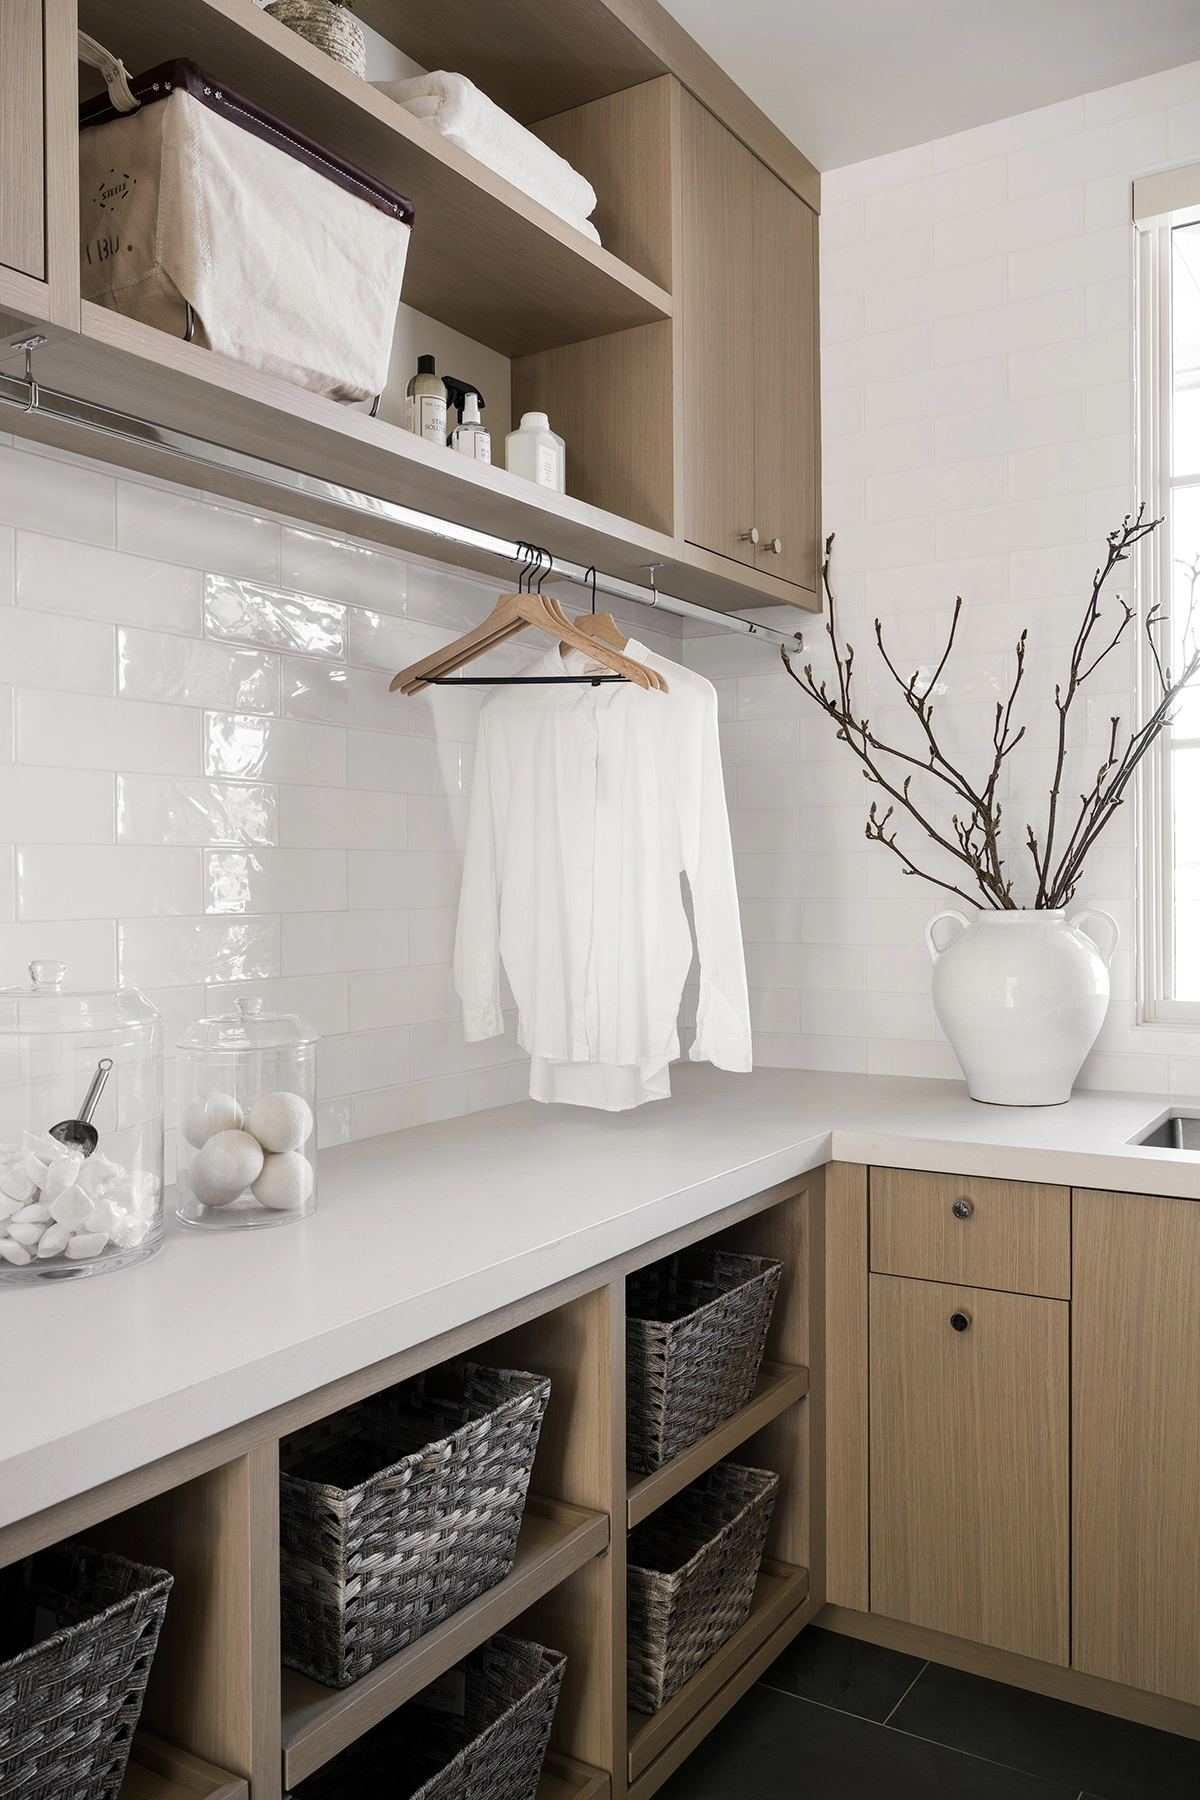 laundry room with natural wood cabinetry and storage baskets